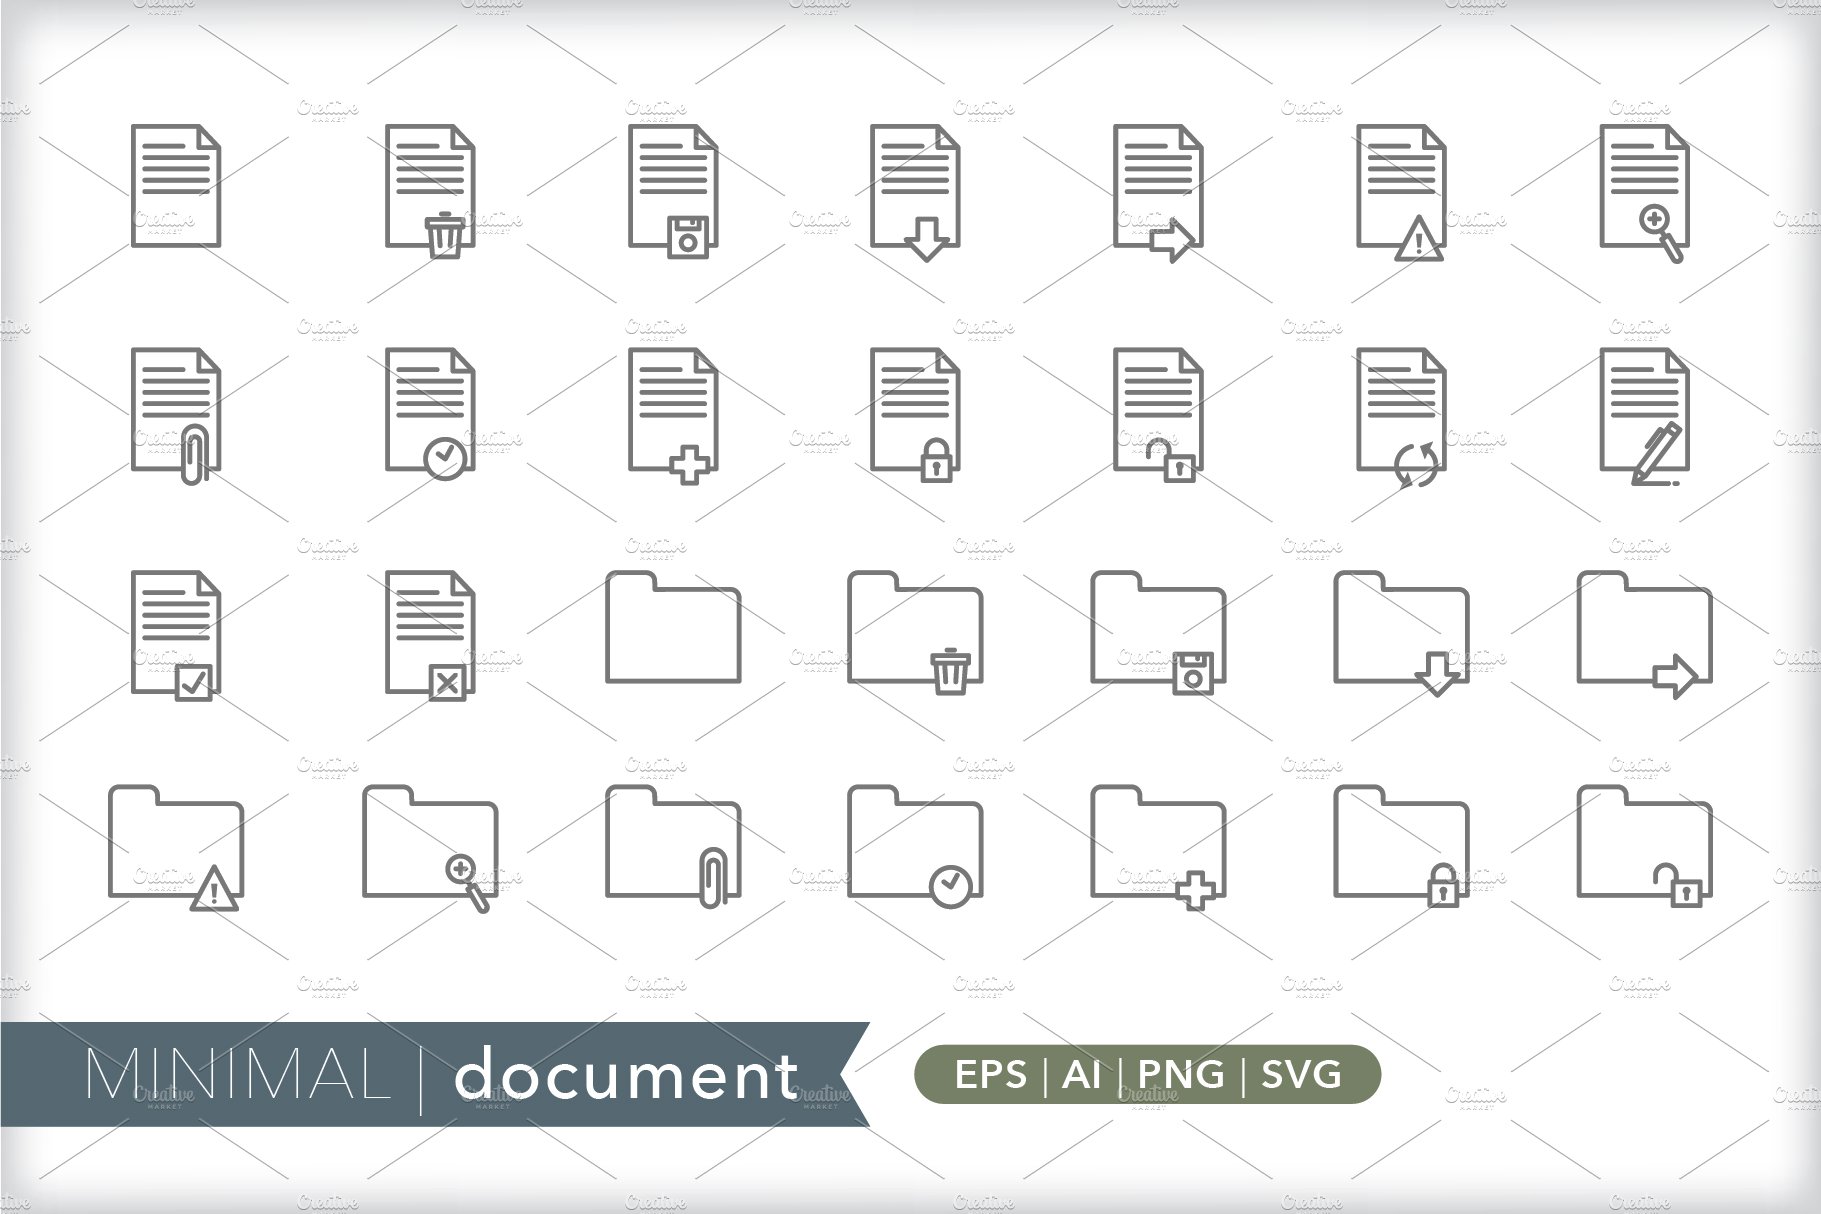 Minimal document icons preview image.